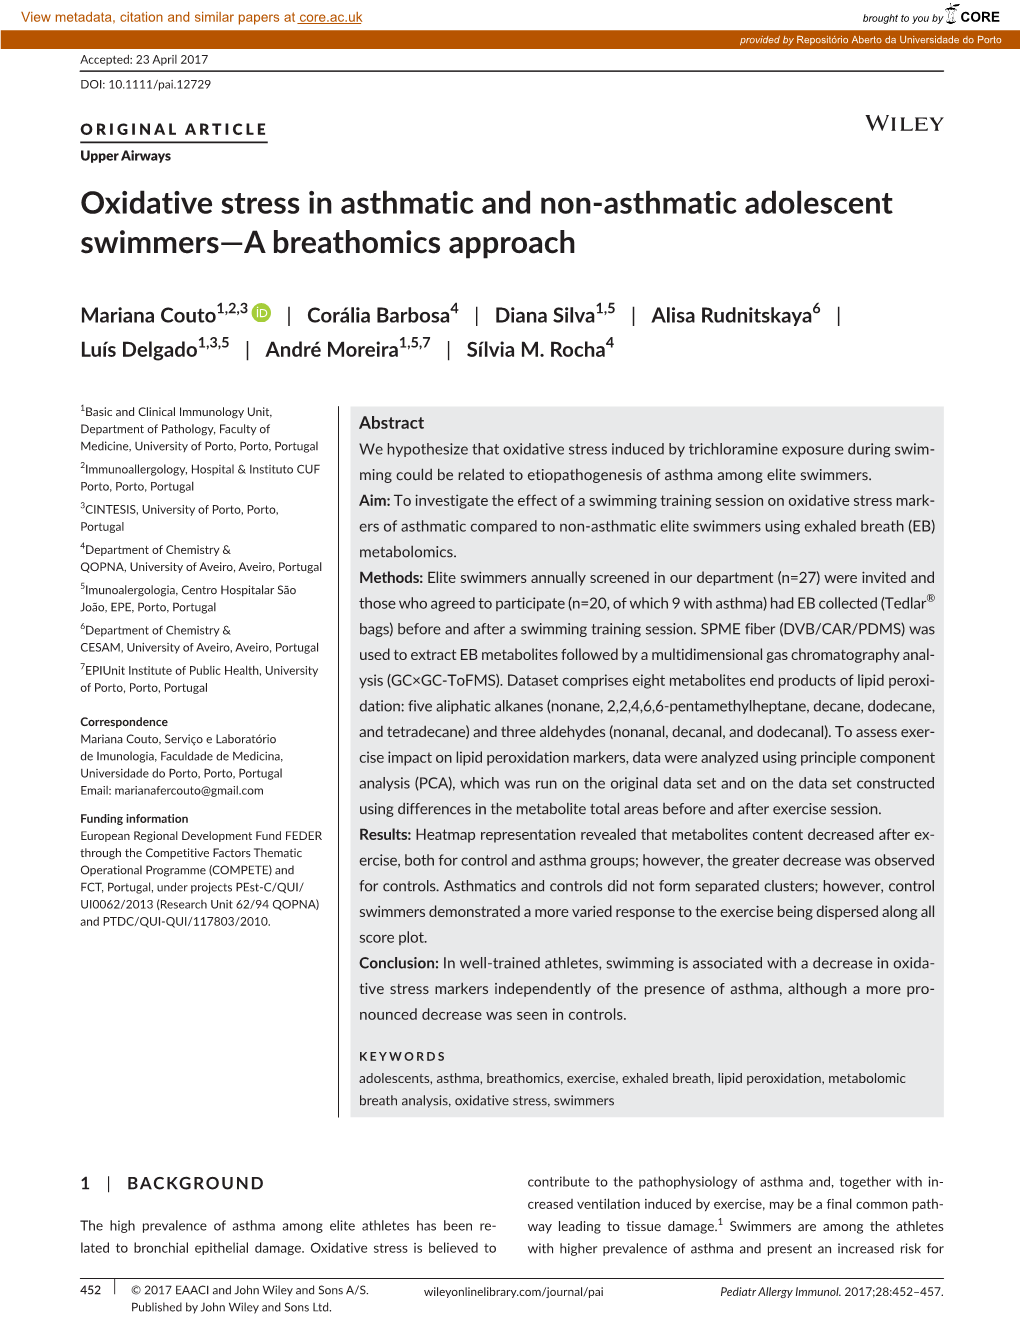 Oxidative Stress in Asthmatic and Non&#X2010